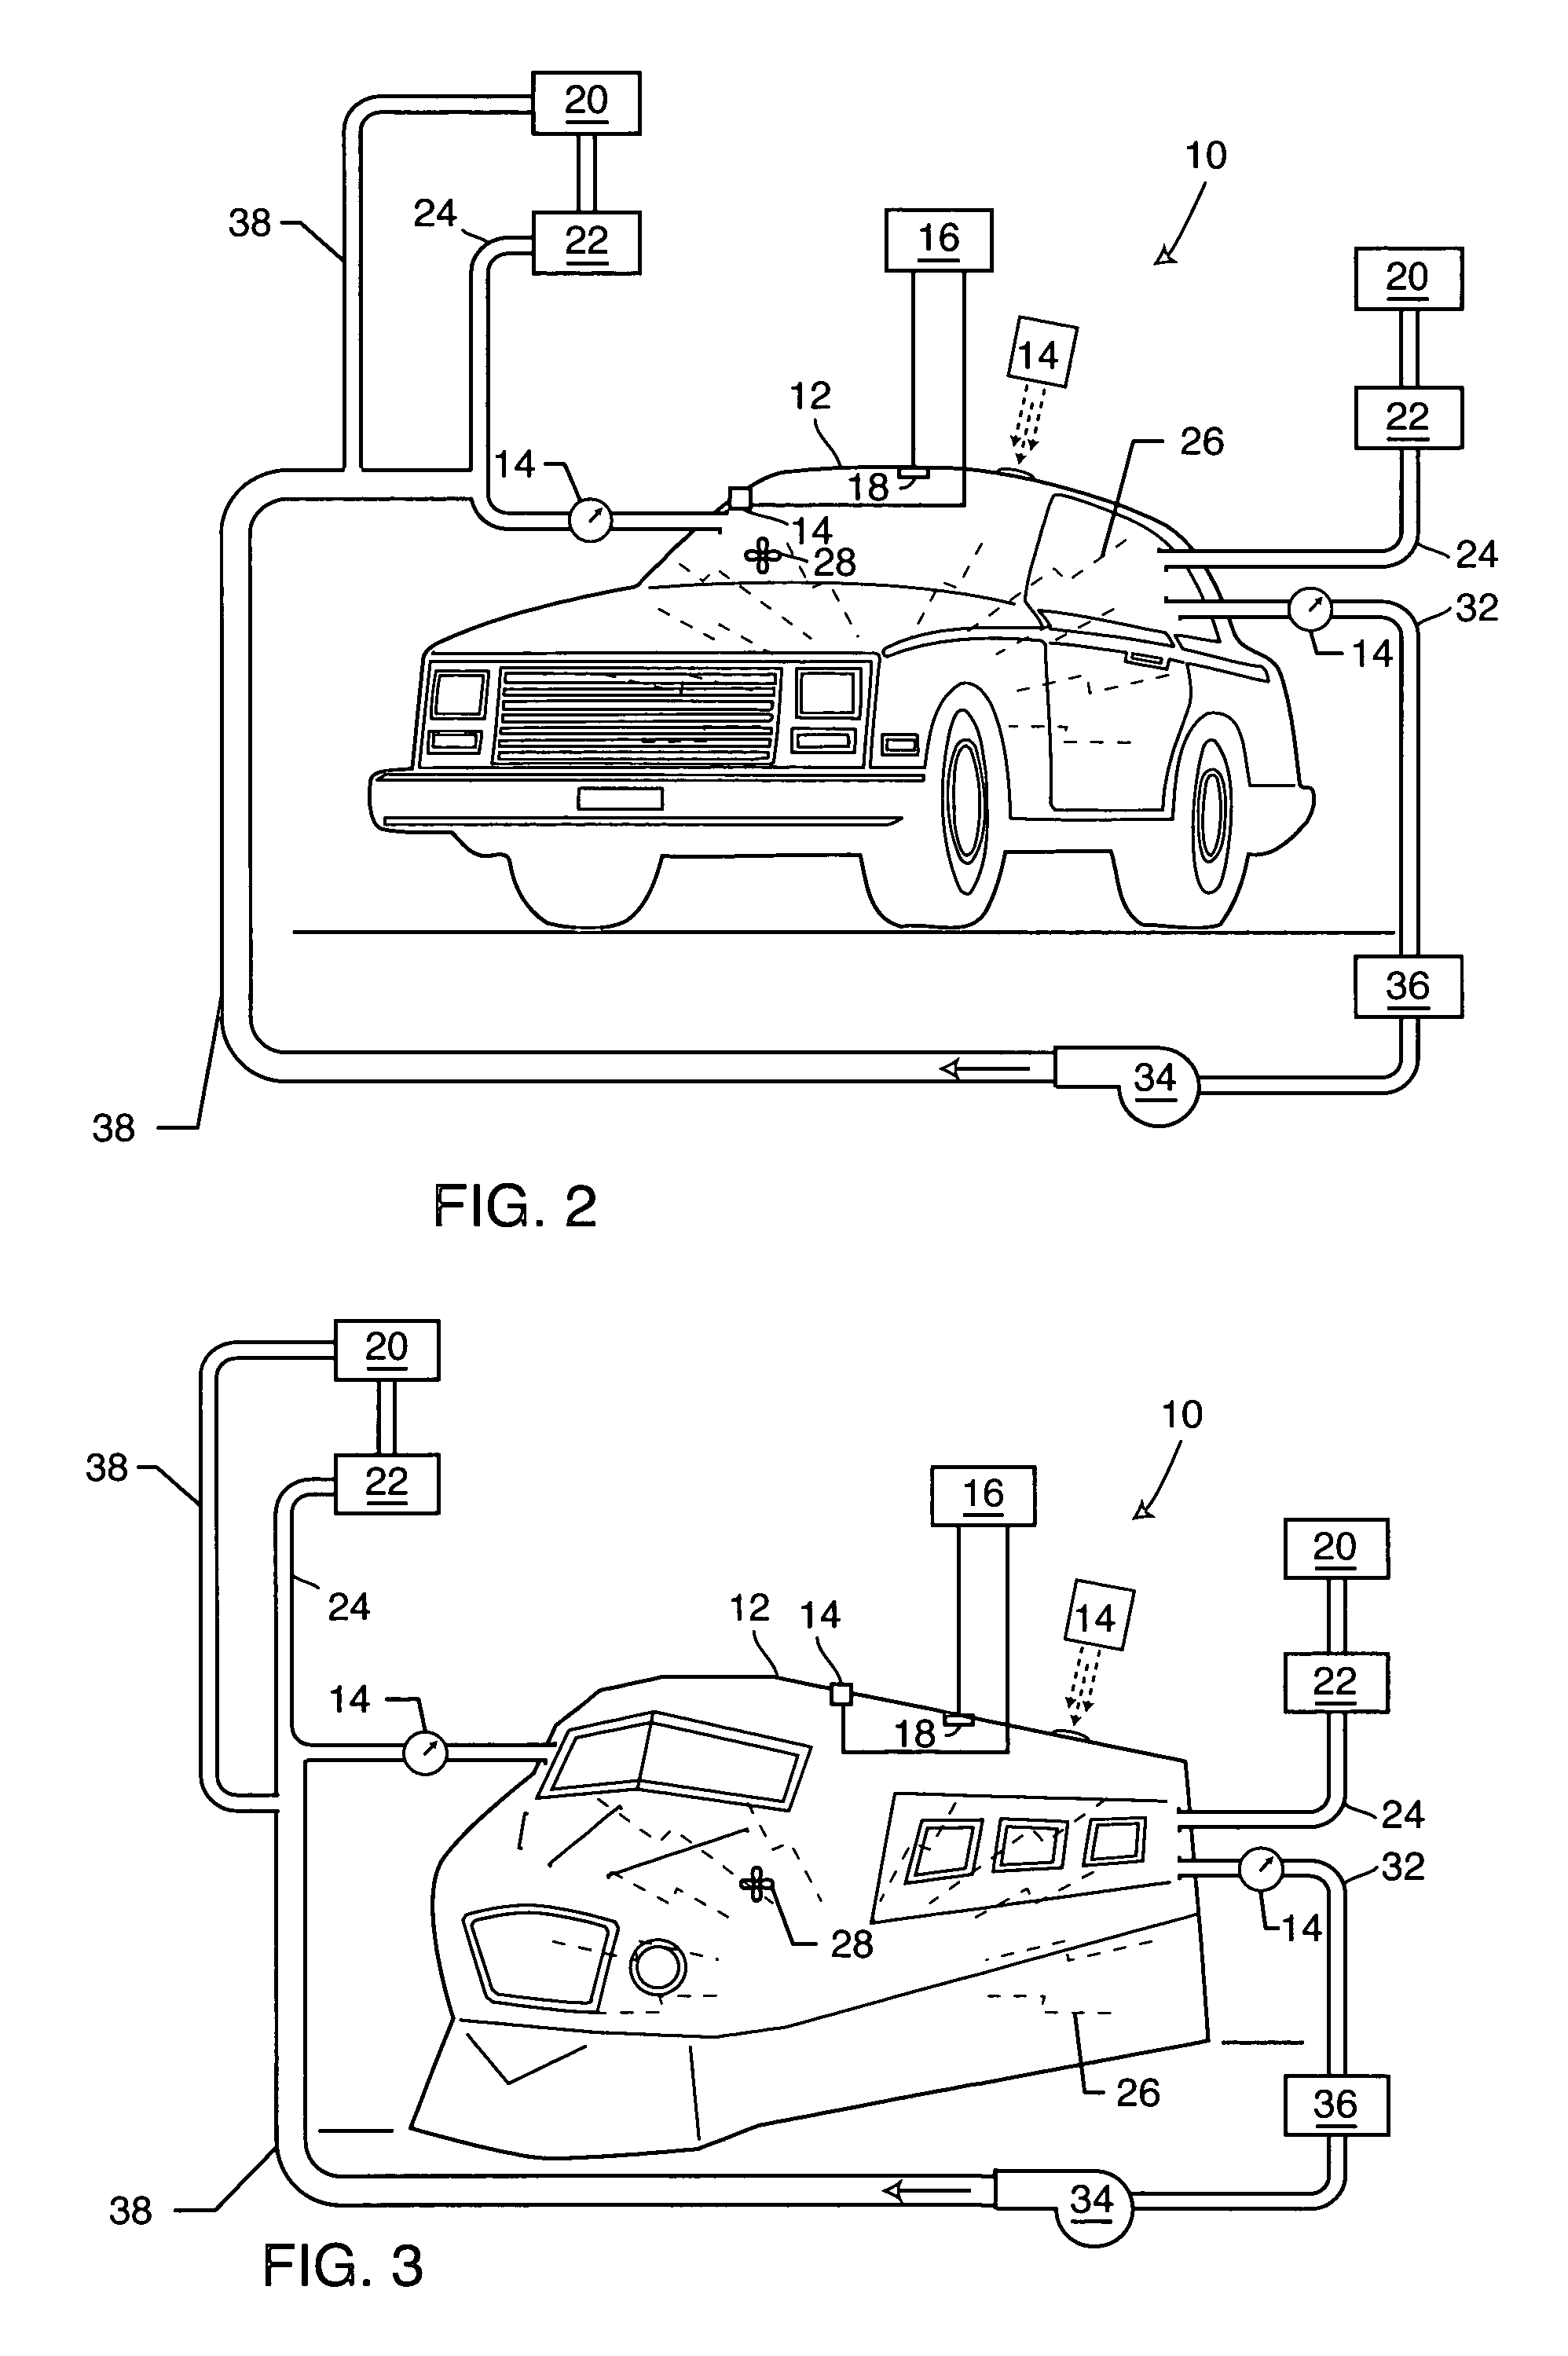 System and process for removing or treating harmful biological and organic substances within structures and enclosures